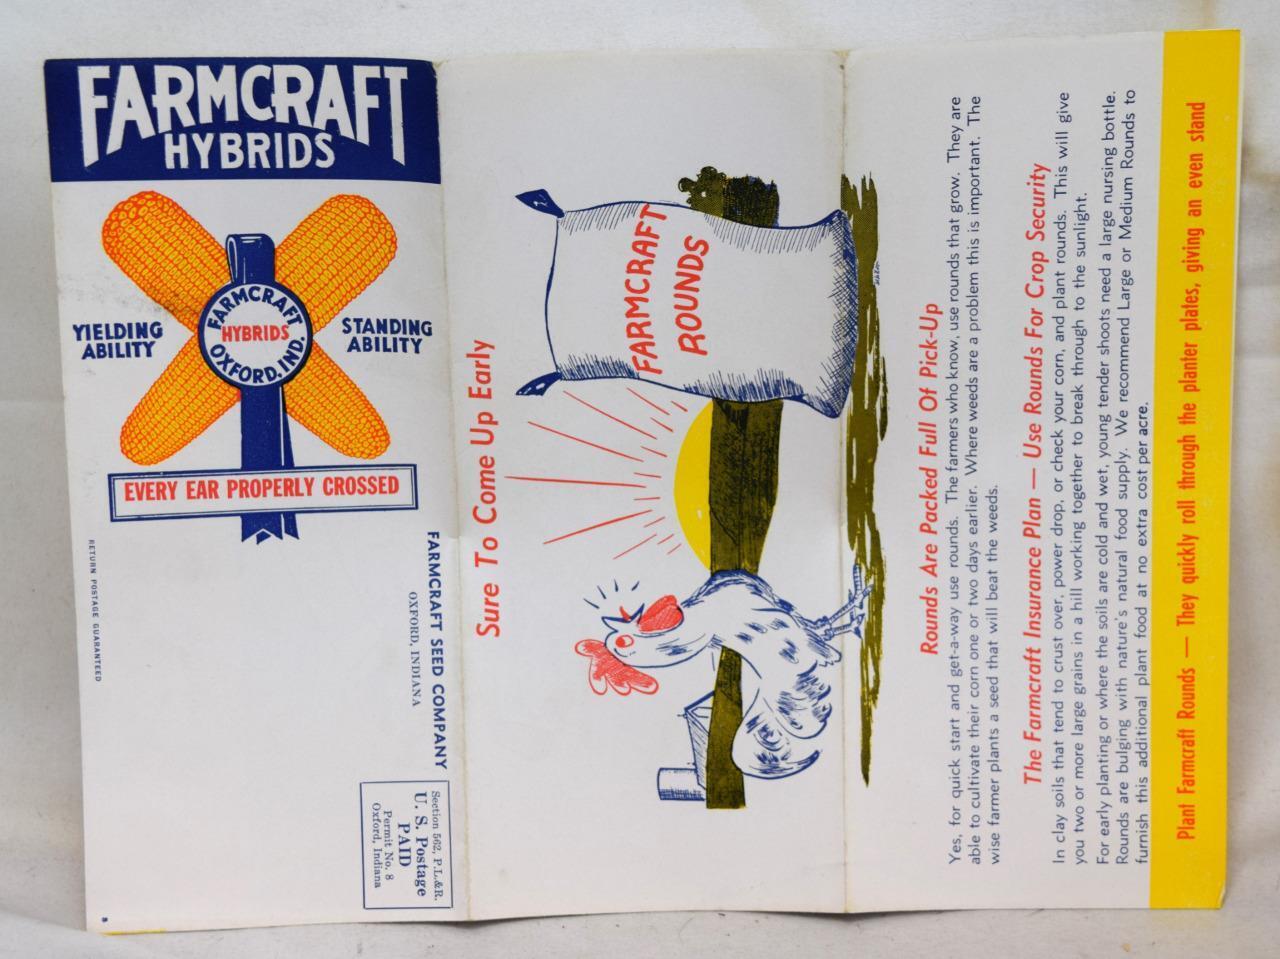 1940s-1950s Farmcraft Seed Company Hybrids Oxford Indiana Fold-Out Mailer A